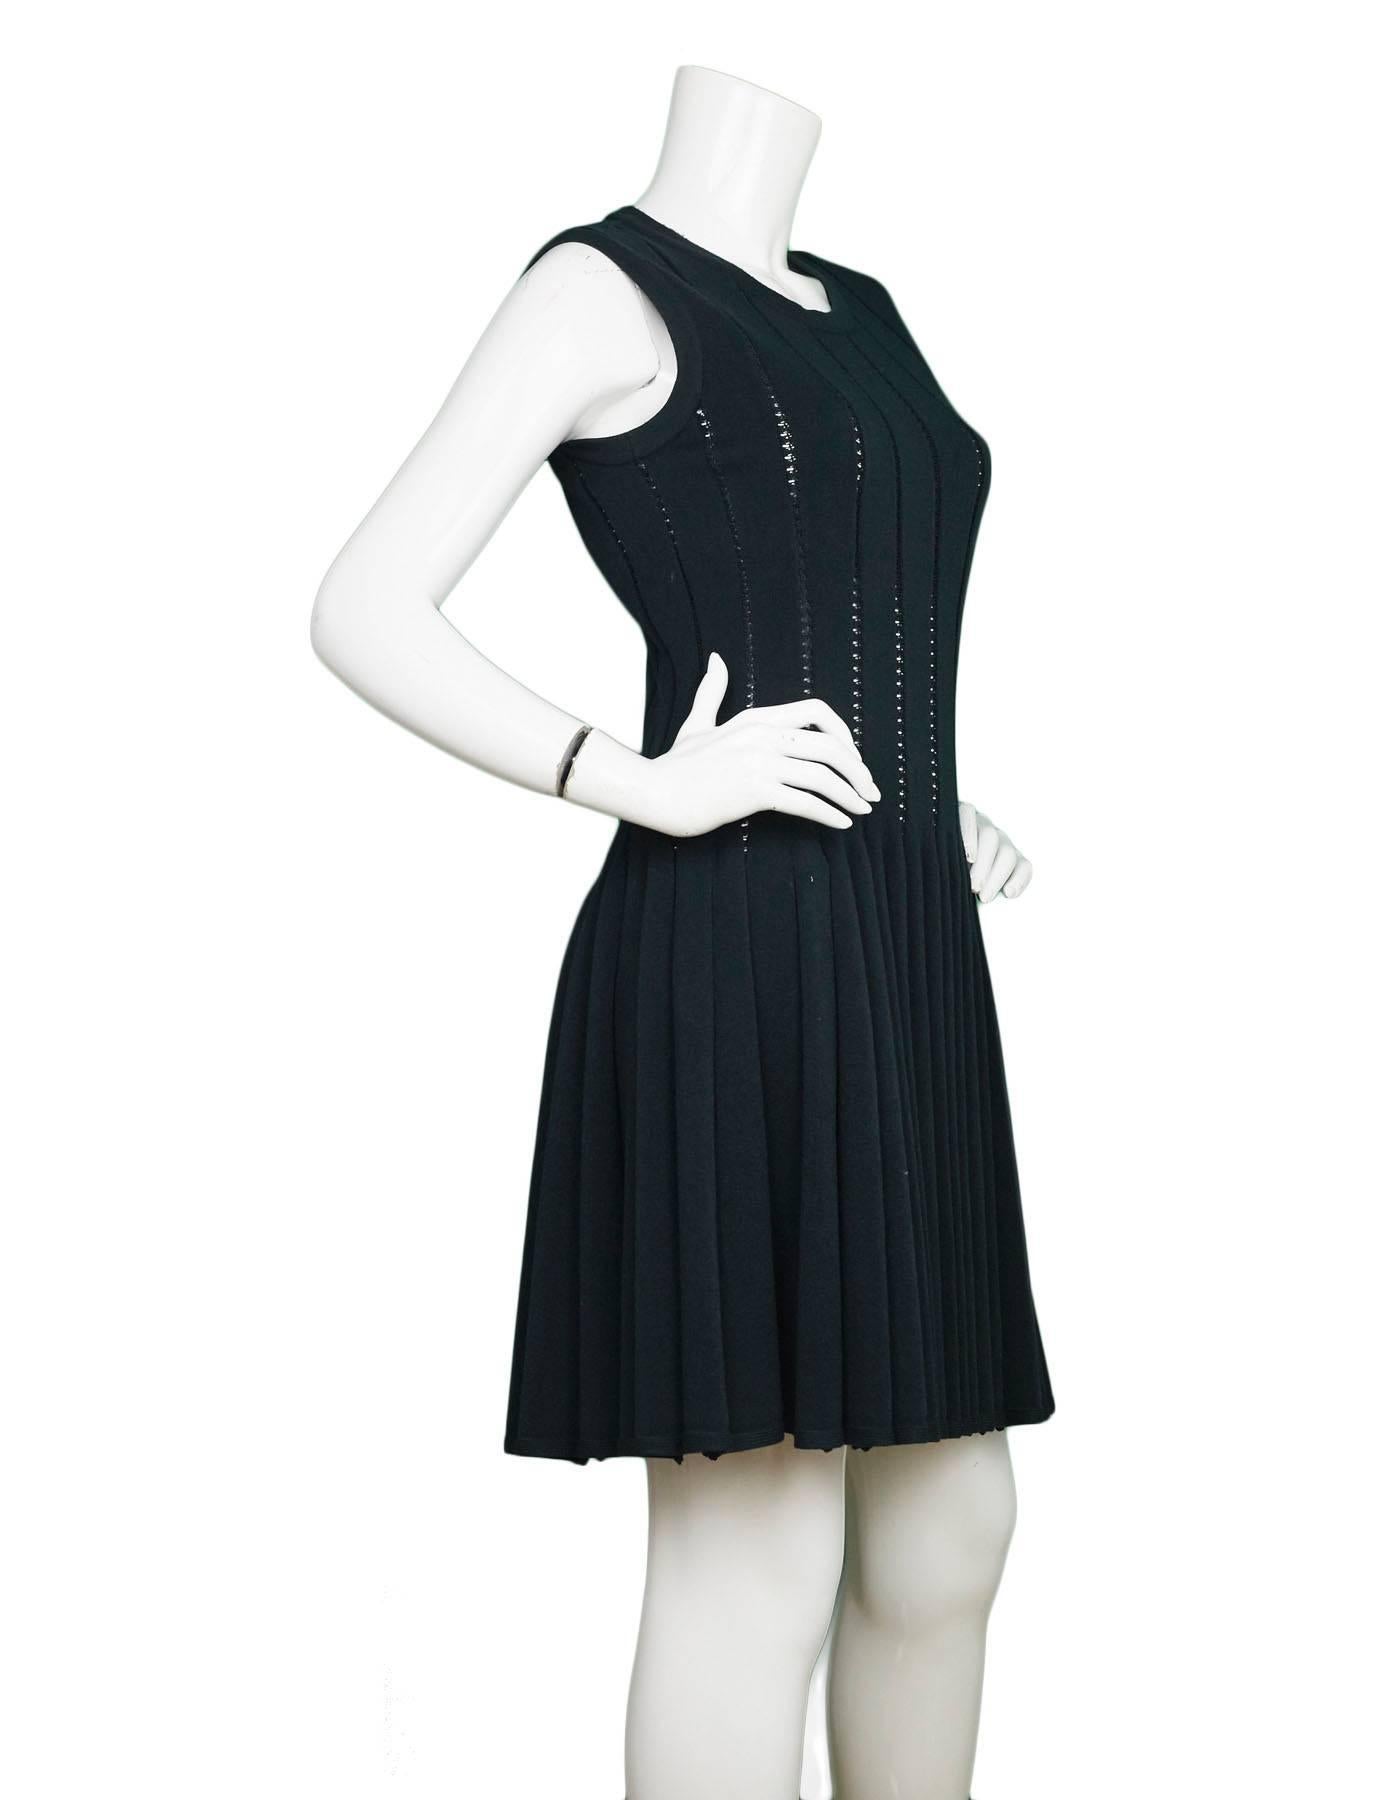 Alaia Dark Green Wool Fit-Flare Dress 
Features perforated vertical knit design throughout dress

Made In: Italy
Color: Dark green
Composition: 80% wool, 10% polyester, 5% cotton, 5% nylon
Lining: None
Closure/Opening: Back center zipper
Exterior